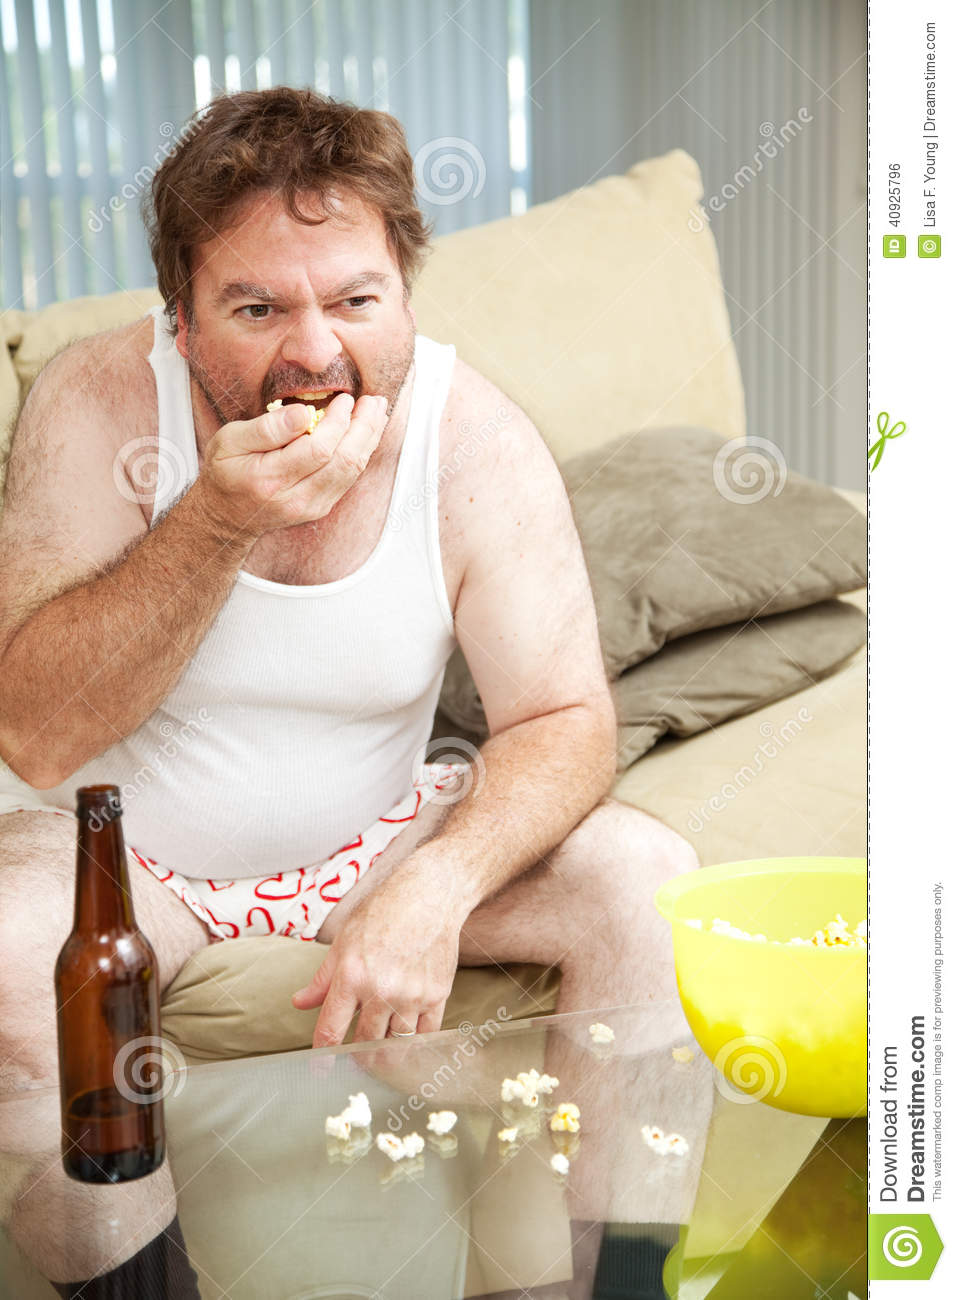 couch-potato-eats-popcorn-middle-aged-man-home-watching-tv-drinking-beer-eating-his-underwear-40925796.jpg